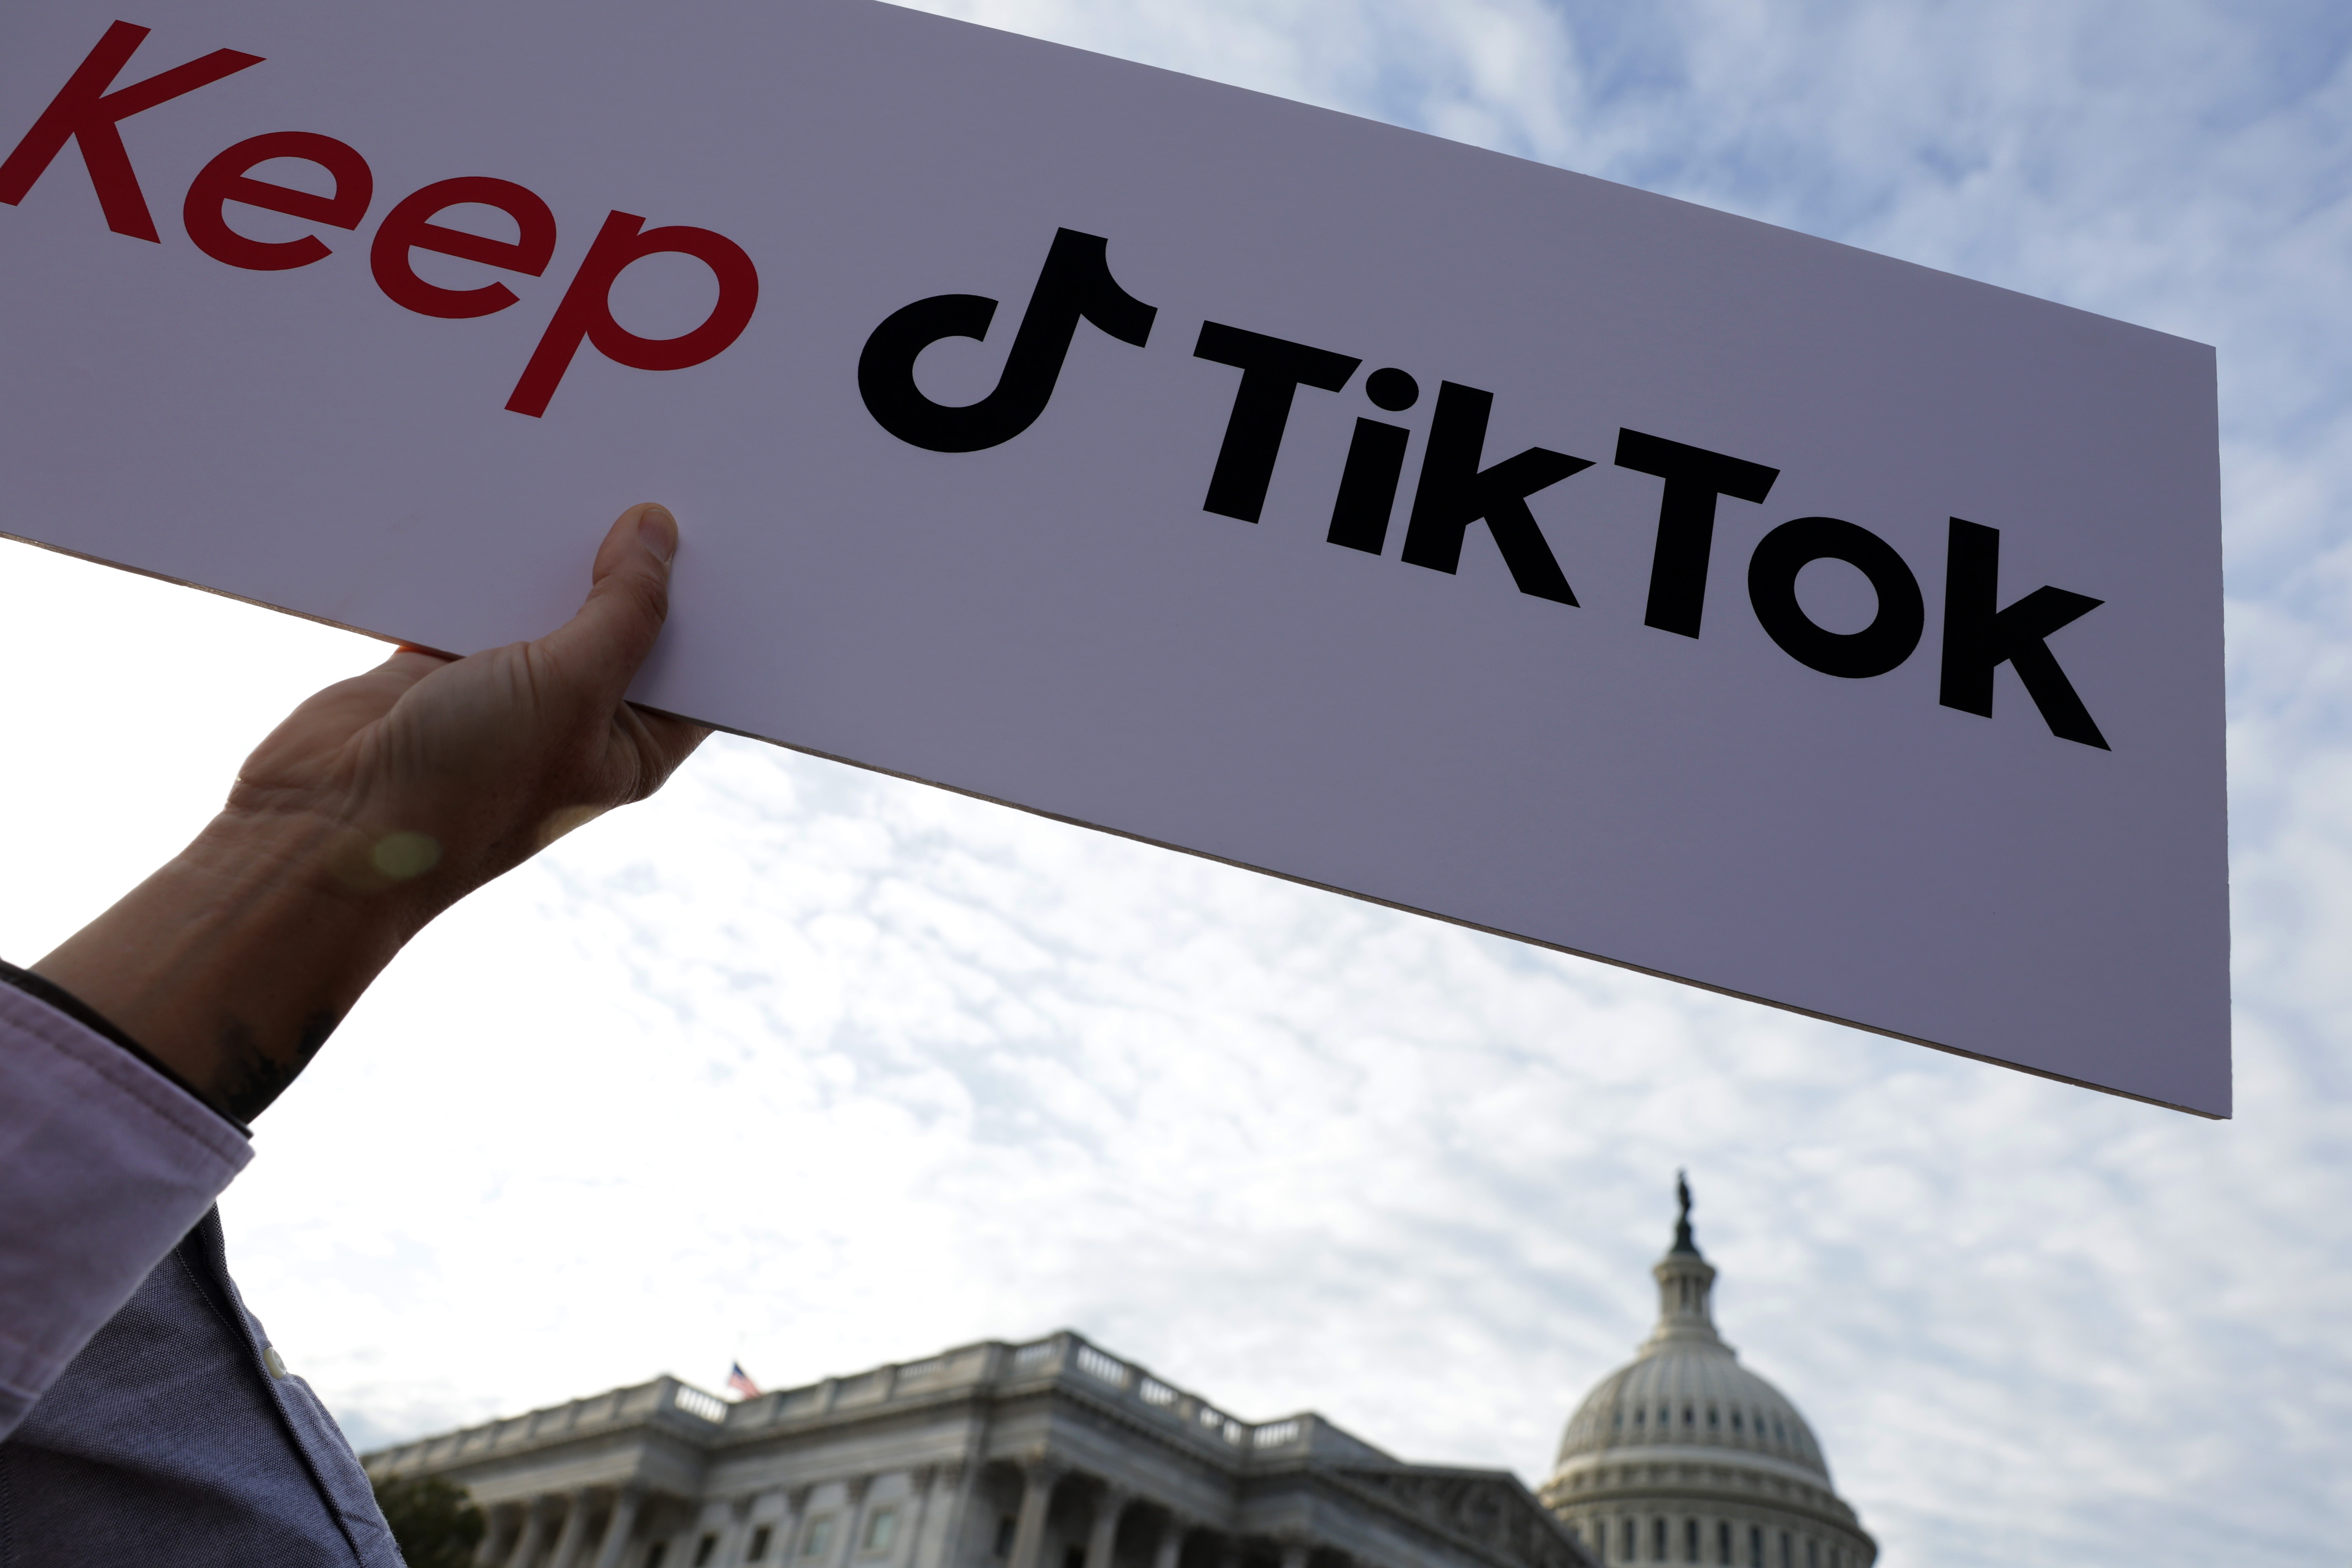 A supporter holds up a sign that read “Keep TikTok” during a news conference on TikTok in front of the U.S. Capitol on March 22, 2023.